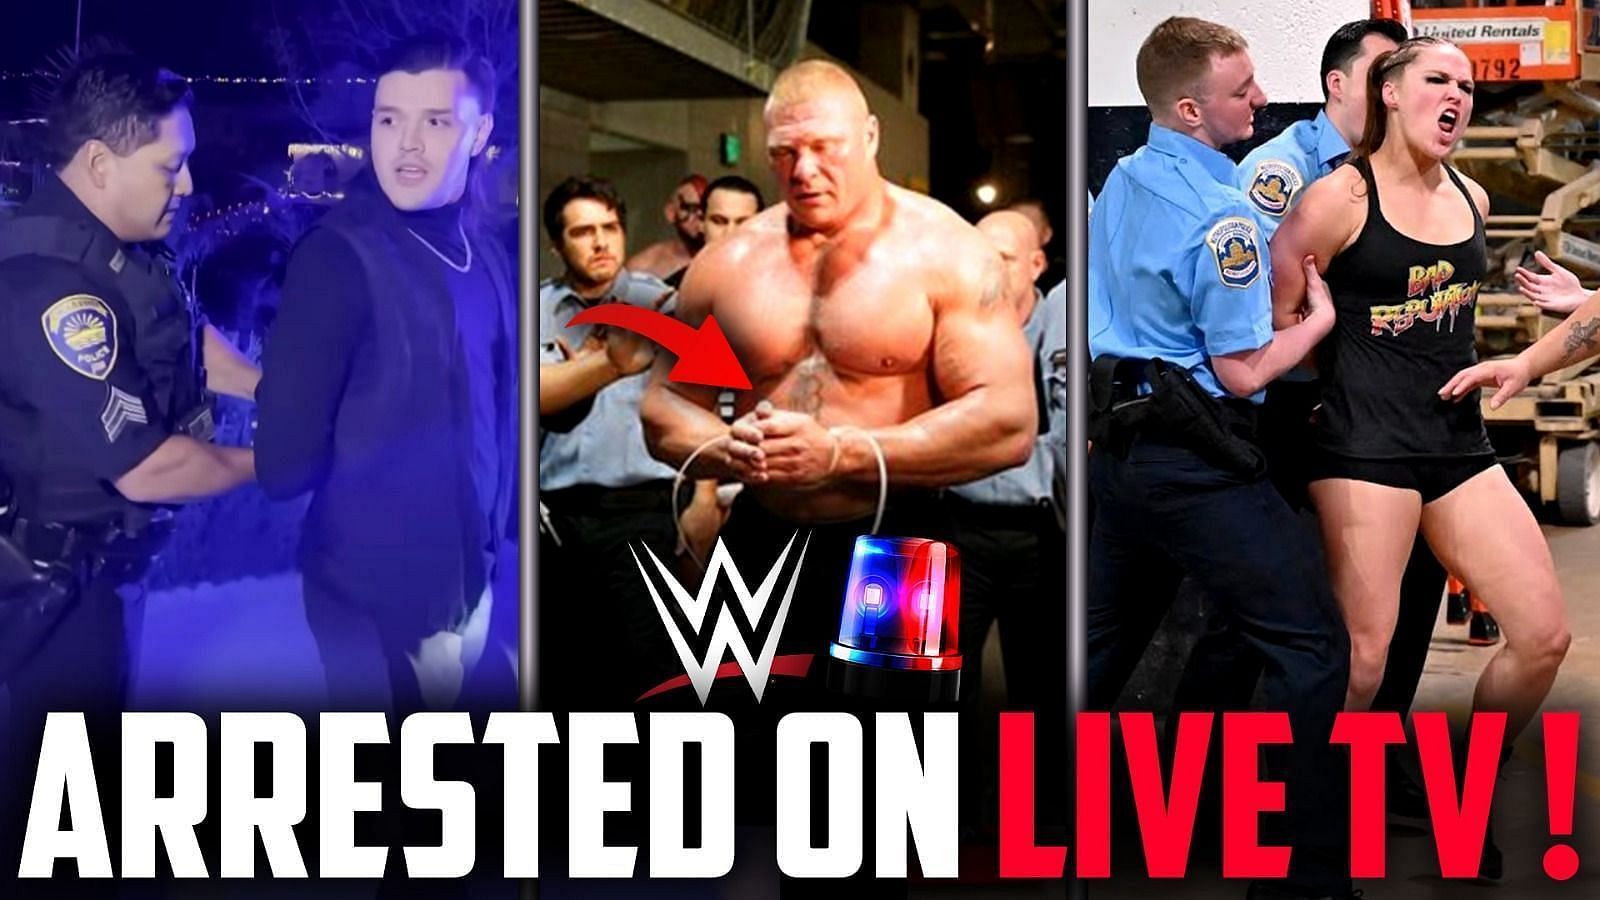 A former WWE champion was recently arrested